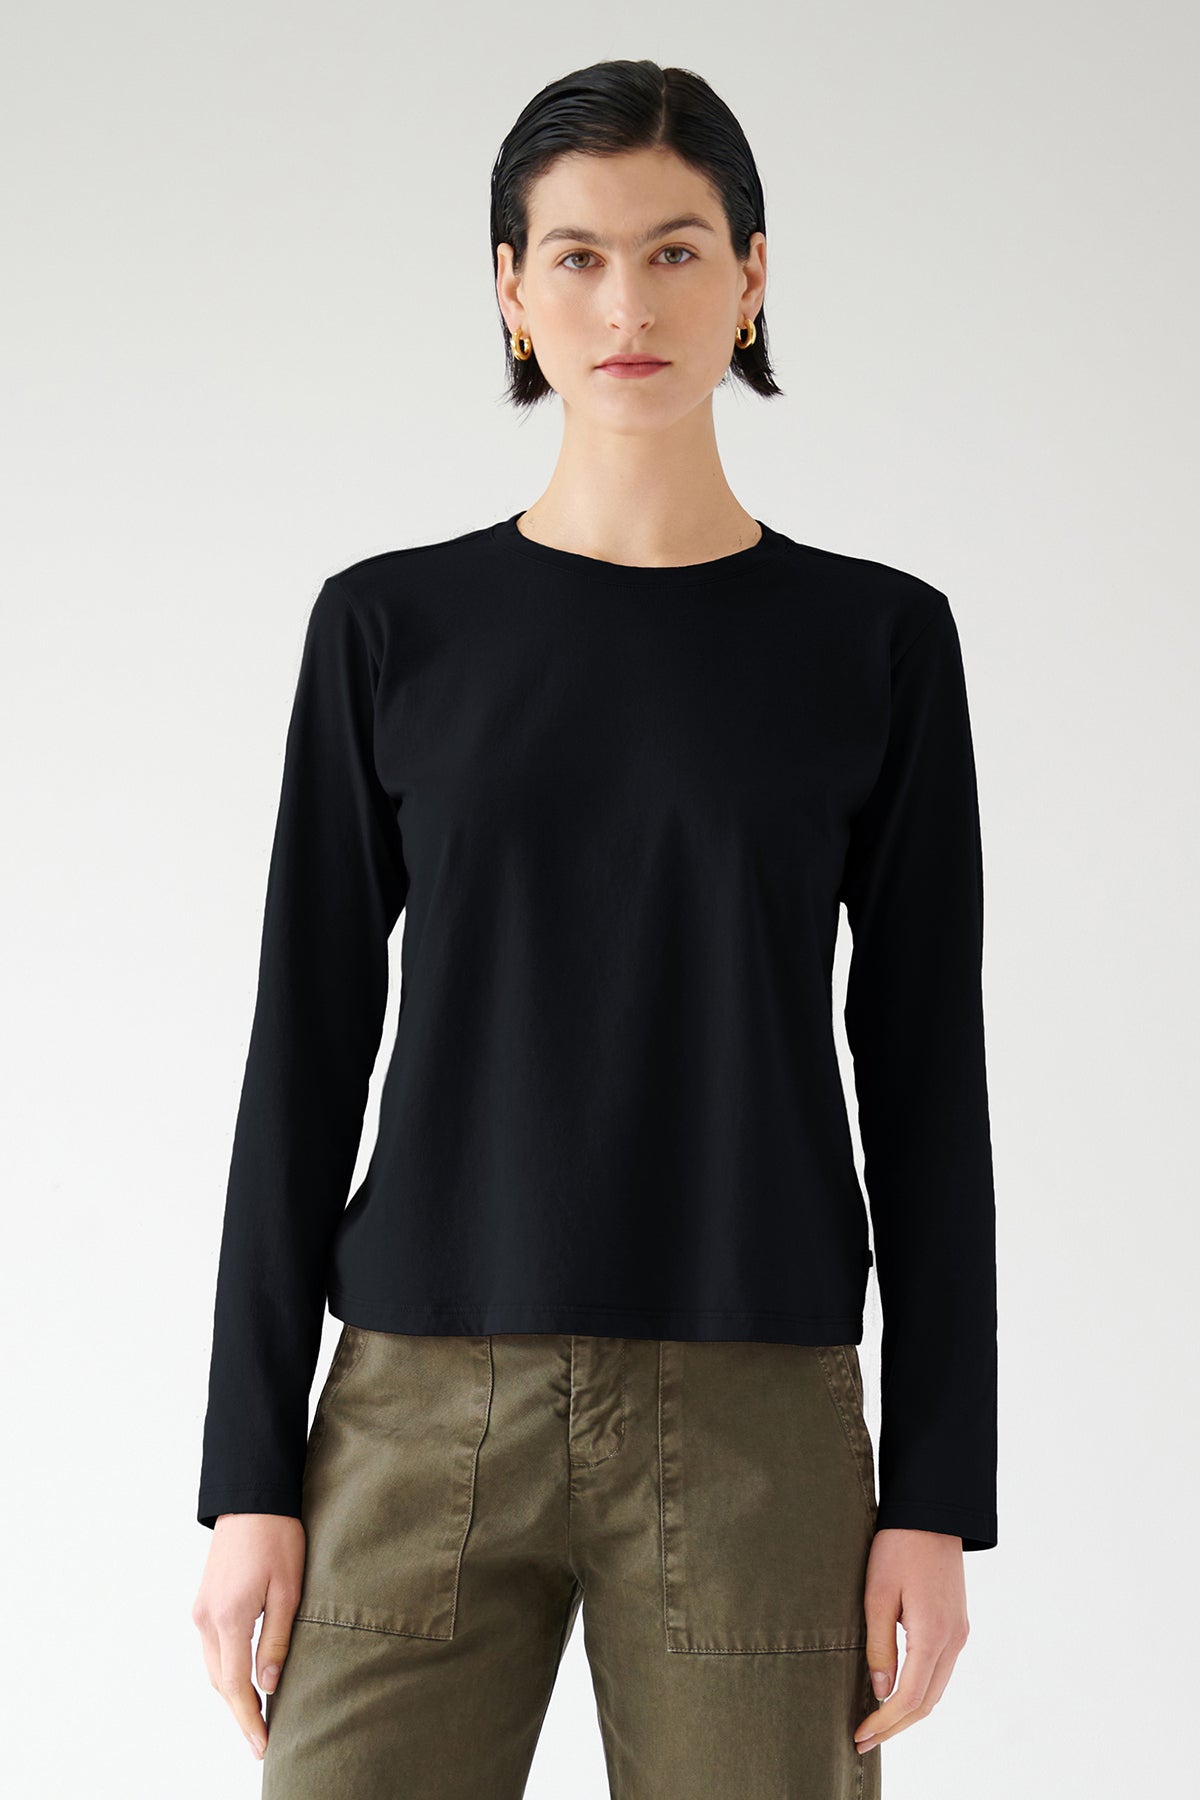 Woman wearing a black VICENTE TEE by Velvet by Jenny Graham and olive pants made of organic cotton, standing against a white background.-36503784095937